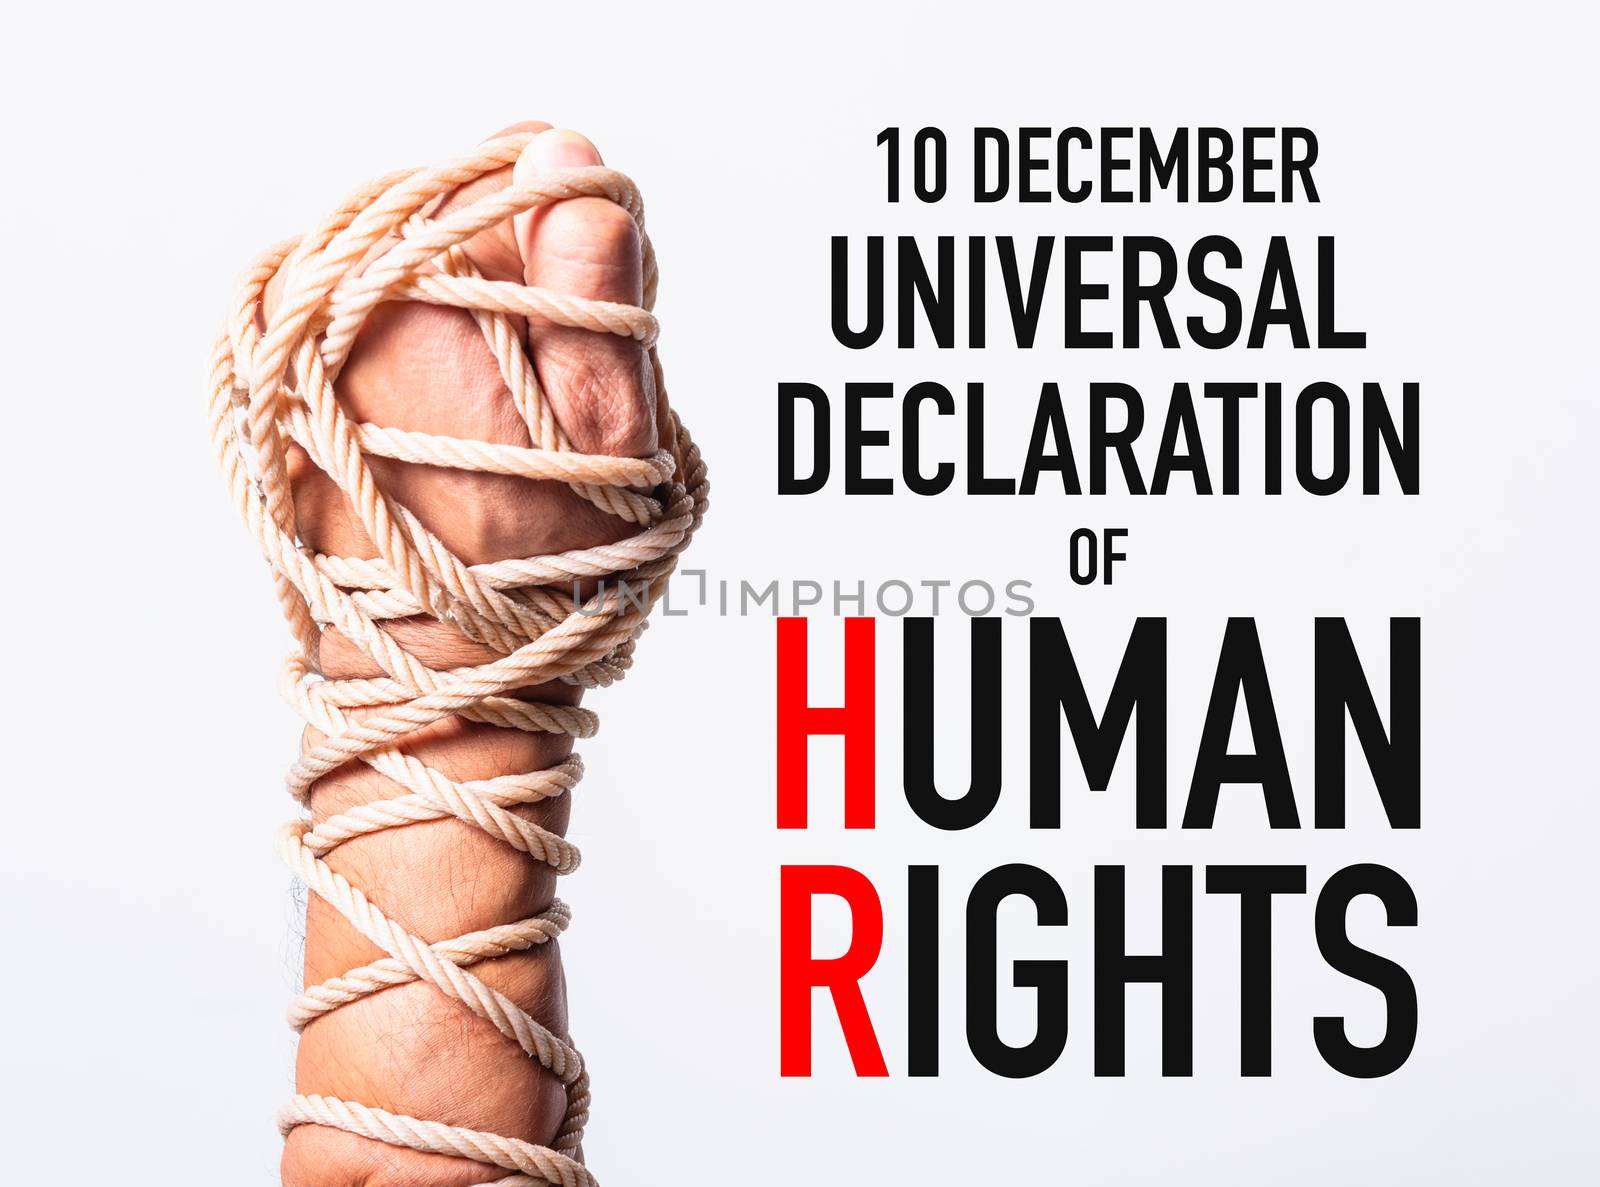 Rope on fist hand with 10 december universal declaration of HUMAN RIGHTS DAY text on white background, Human rights day concept